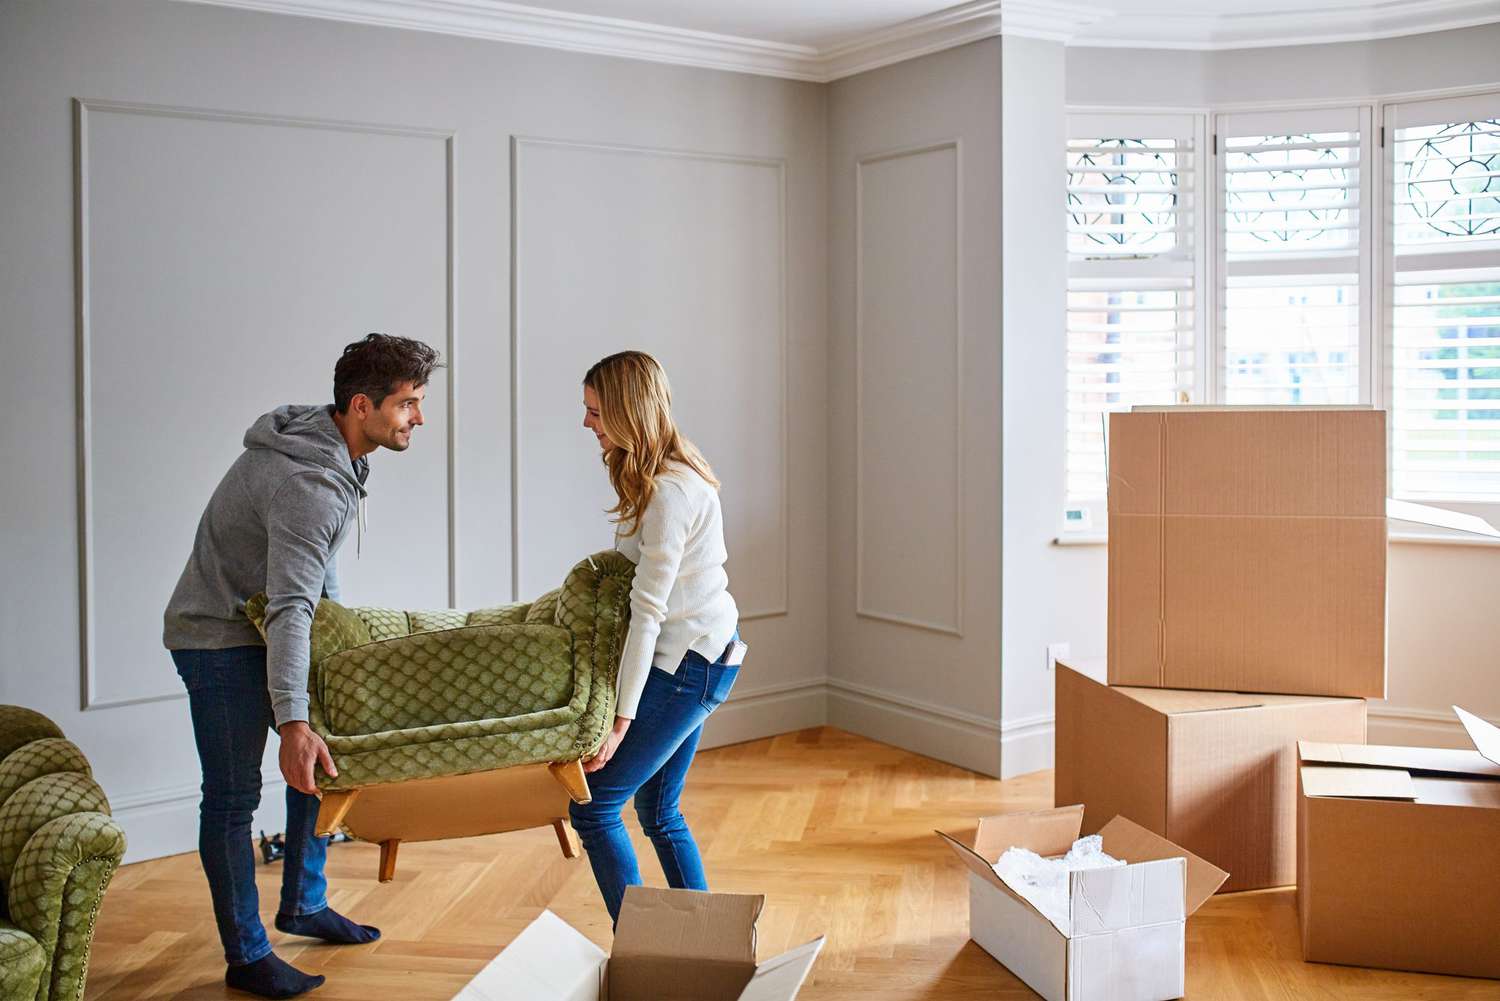 8 Smart Ways to Save on Moving Costs, According to Pros